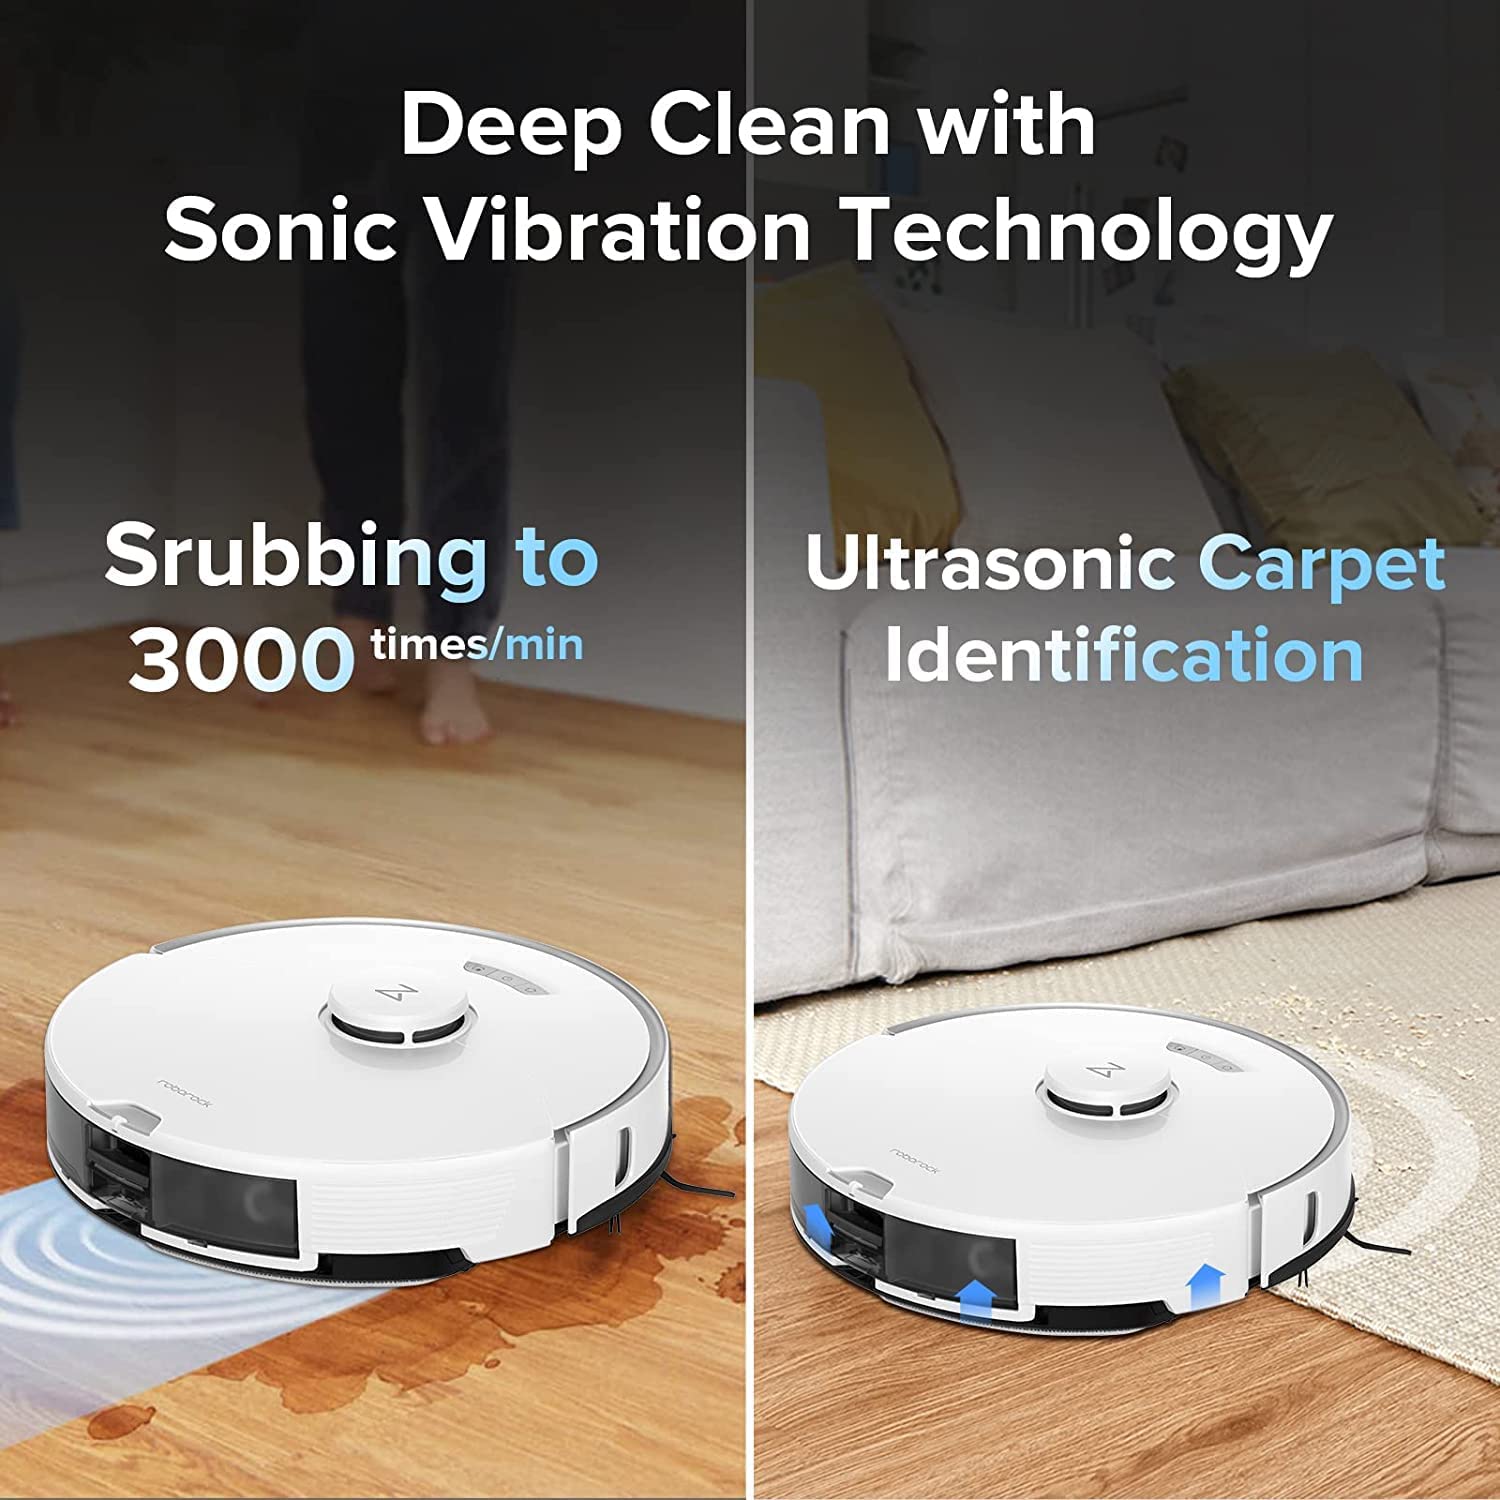 Roborock S7 Pro Ultra 5100Pa Vacuum Cleaner Robot with Self-Washing/Self-Refilling/Self-Emptying/Self-Cleaning Dock, Robot Vacuum Cleaner Connected by Alexa/App 3D Mapping